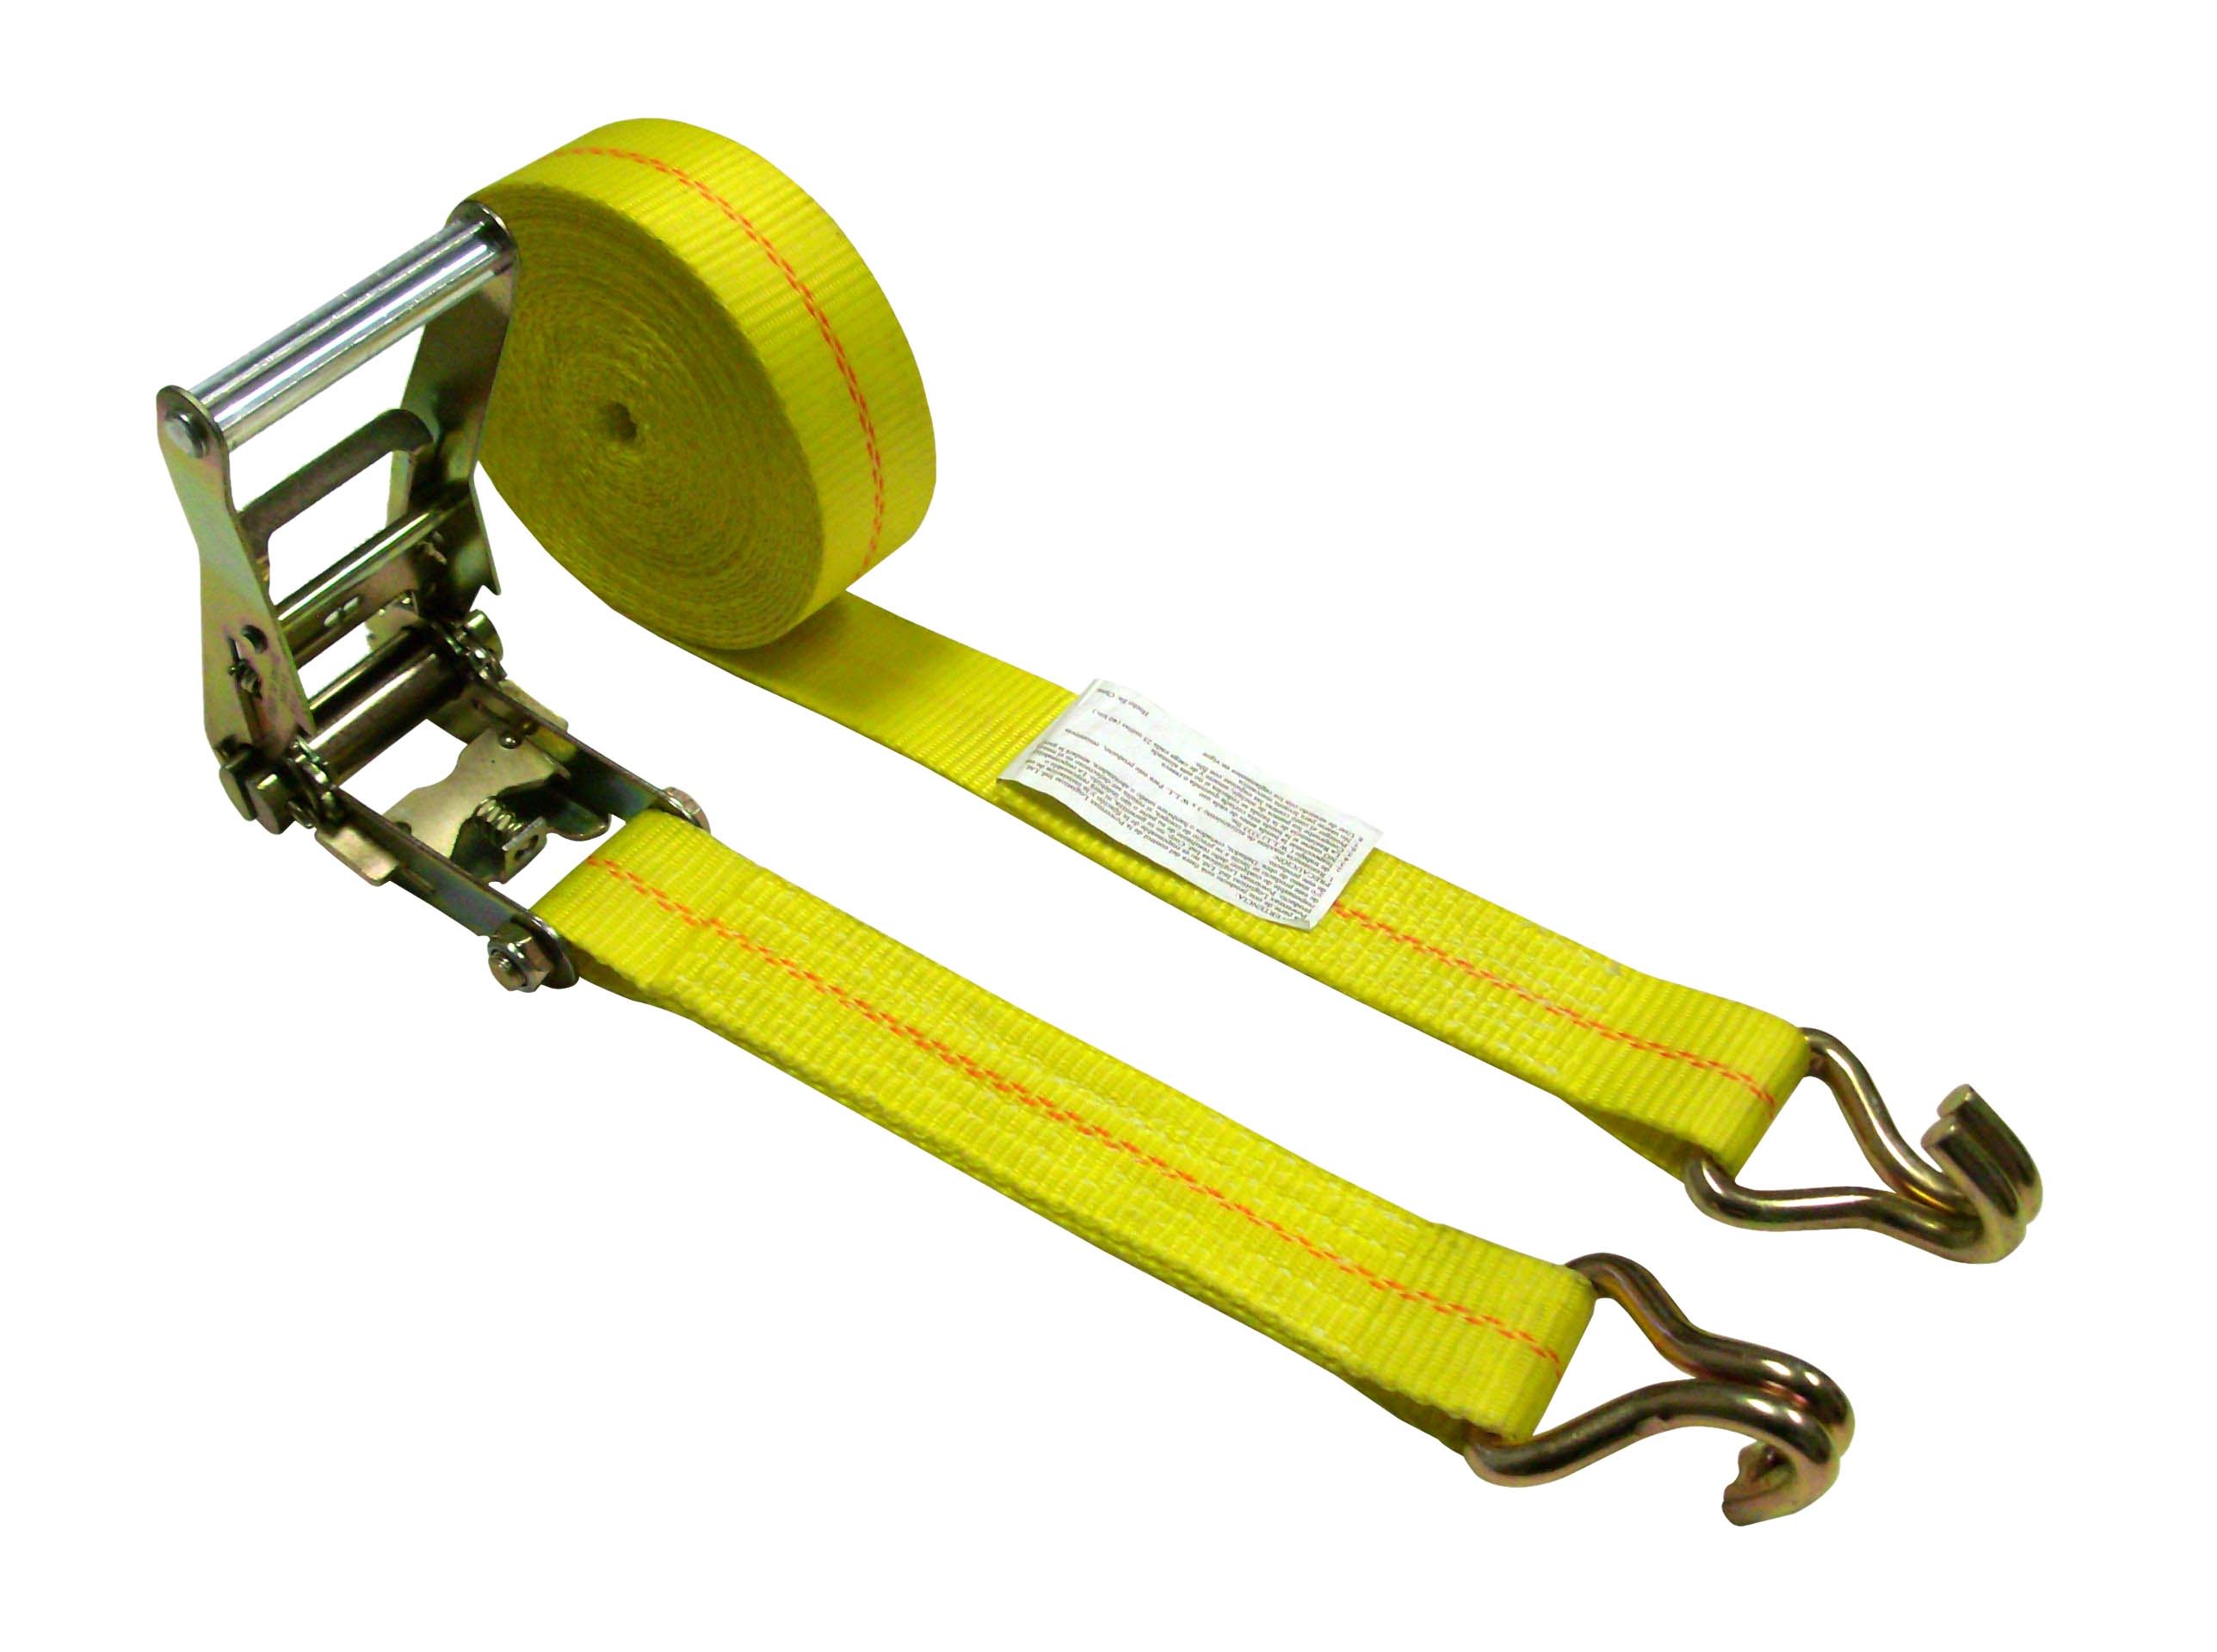 2 x 30' Ratchet Strap w/ Double J Wire Hooks - 3,335lb WLL - MADE IN USA